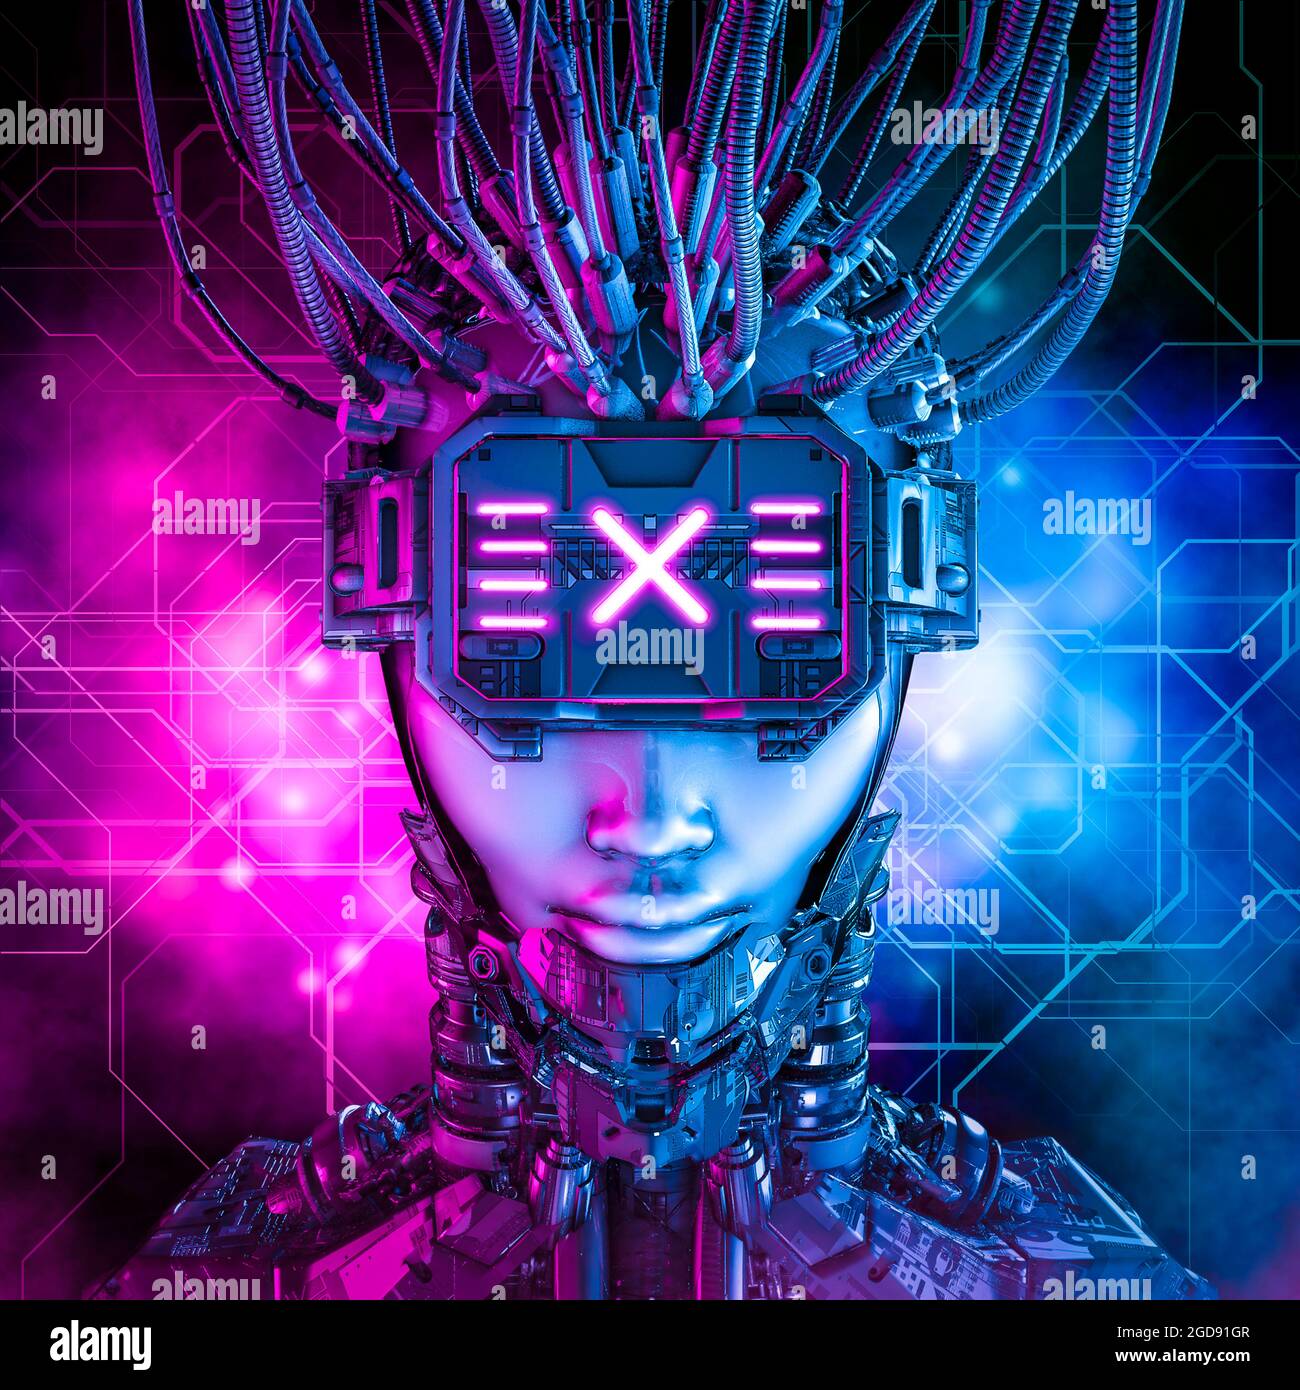 Hardwired cyberpunk female android - 3D illustration of science fiction robot girl wearing futuristic virtual reality glasses Stock Photo